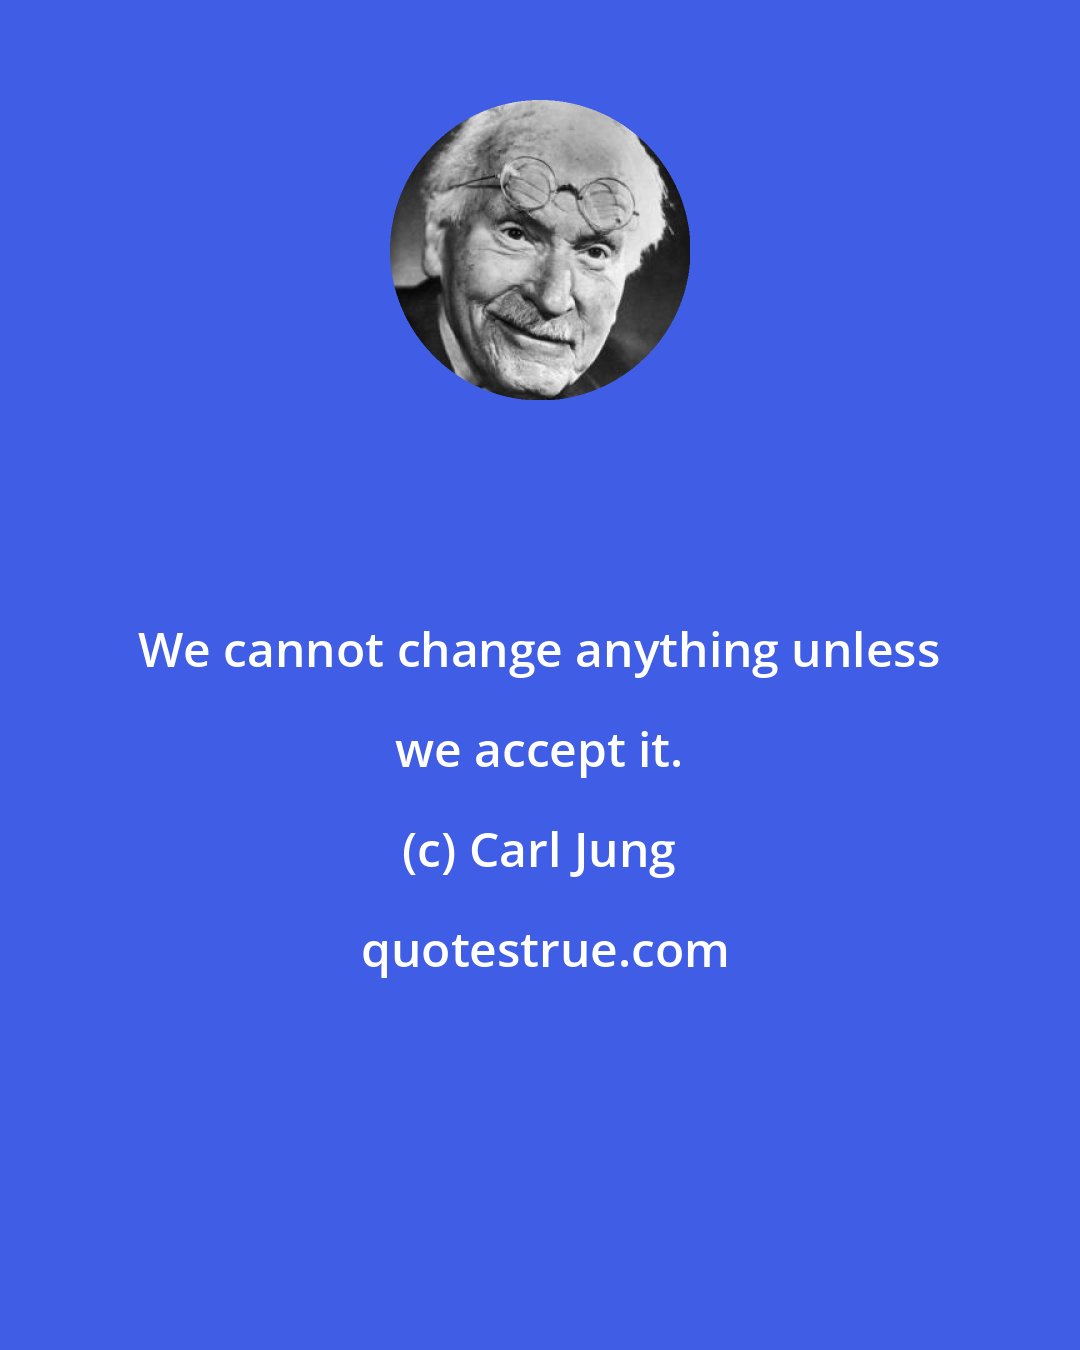 Carl Jung: We cannot change anything unless we accept it.